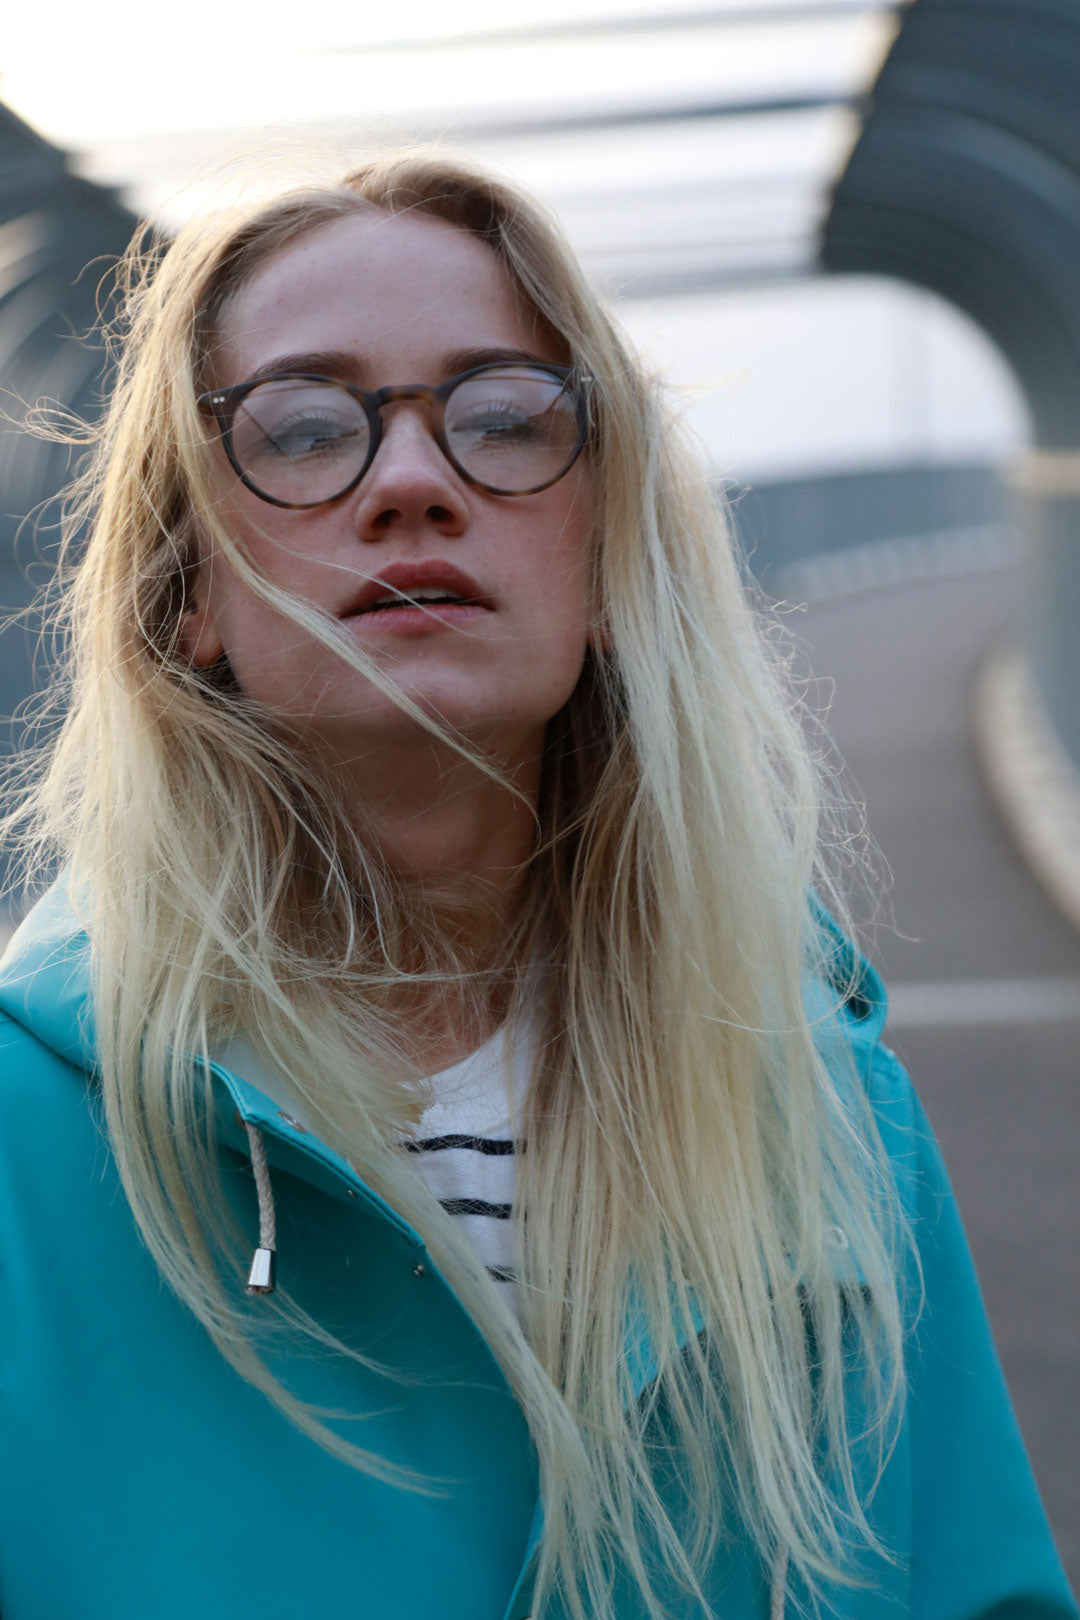 Blonde girl in pale blue jacket looking through round glasses